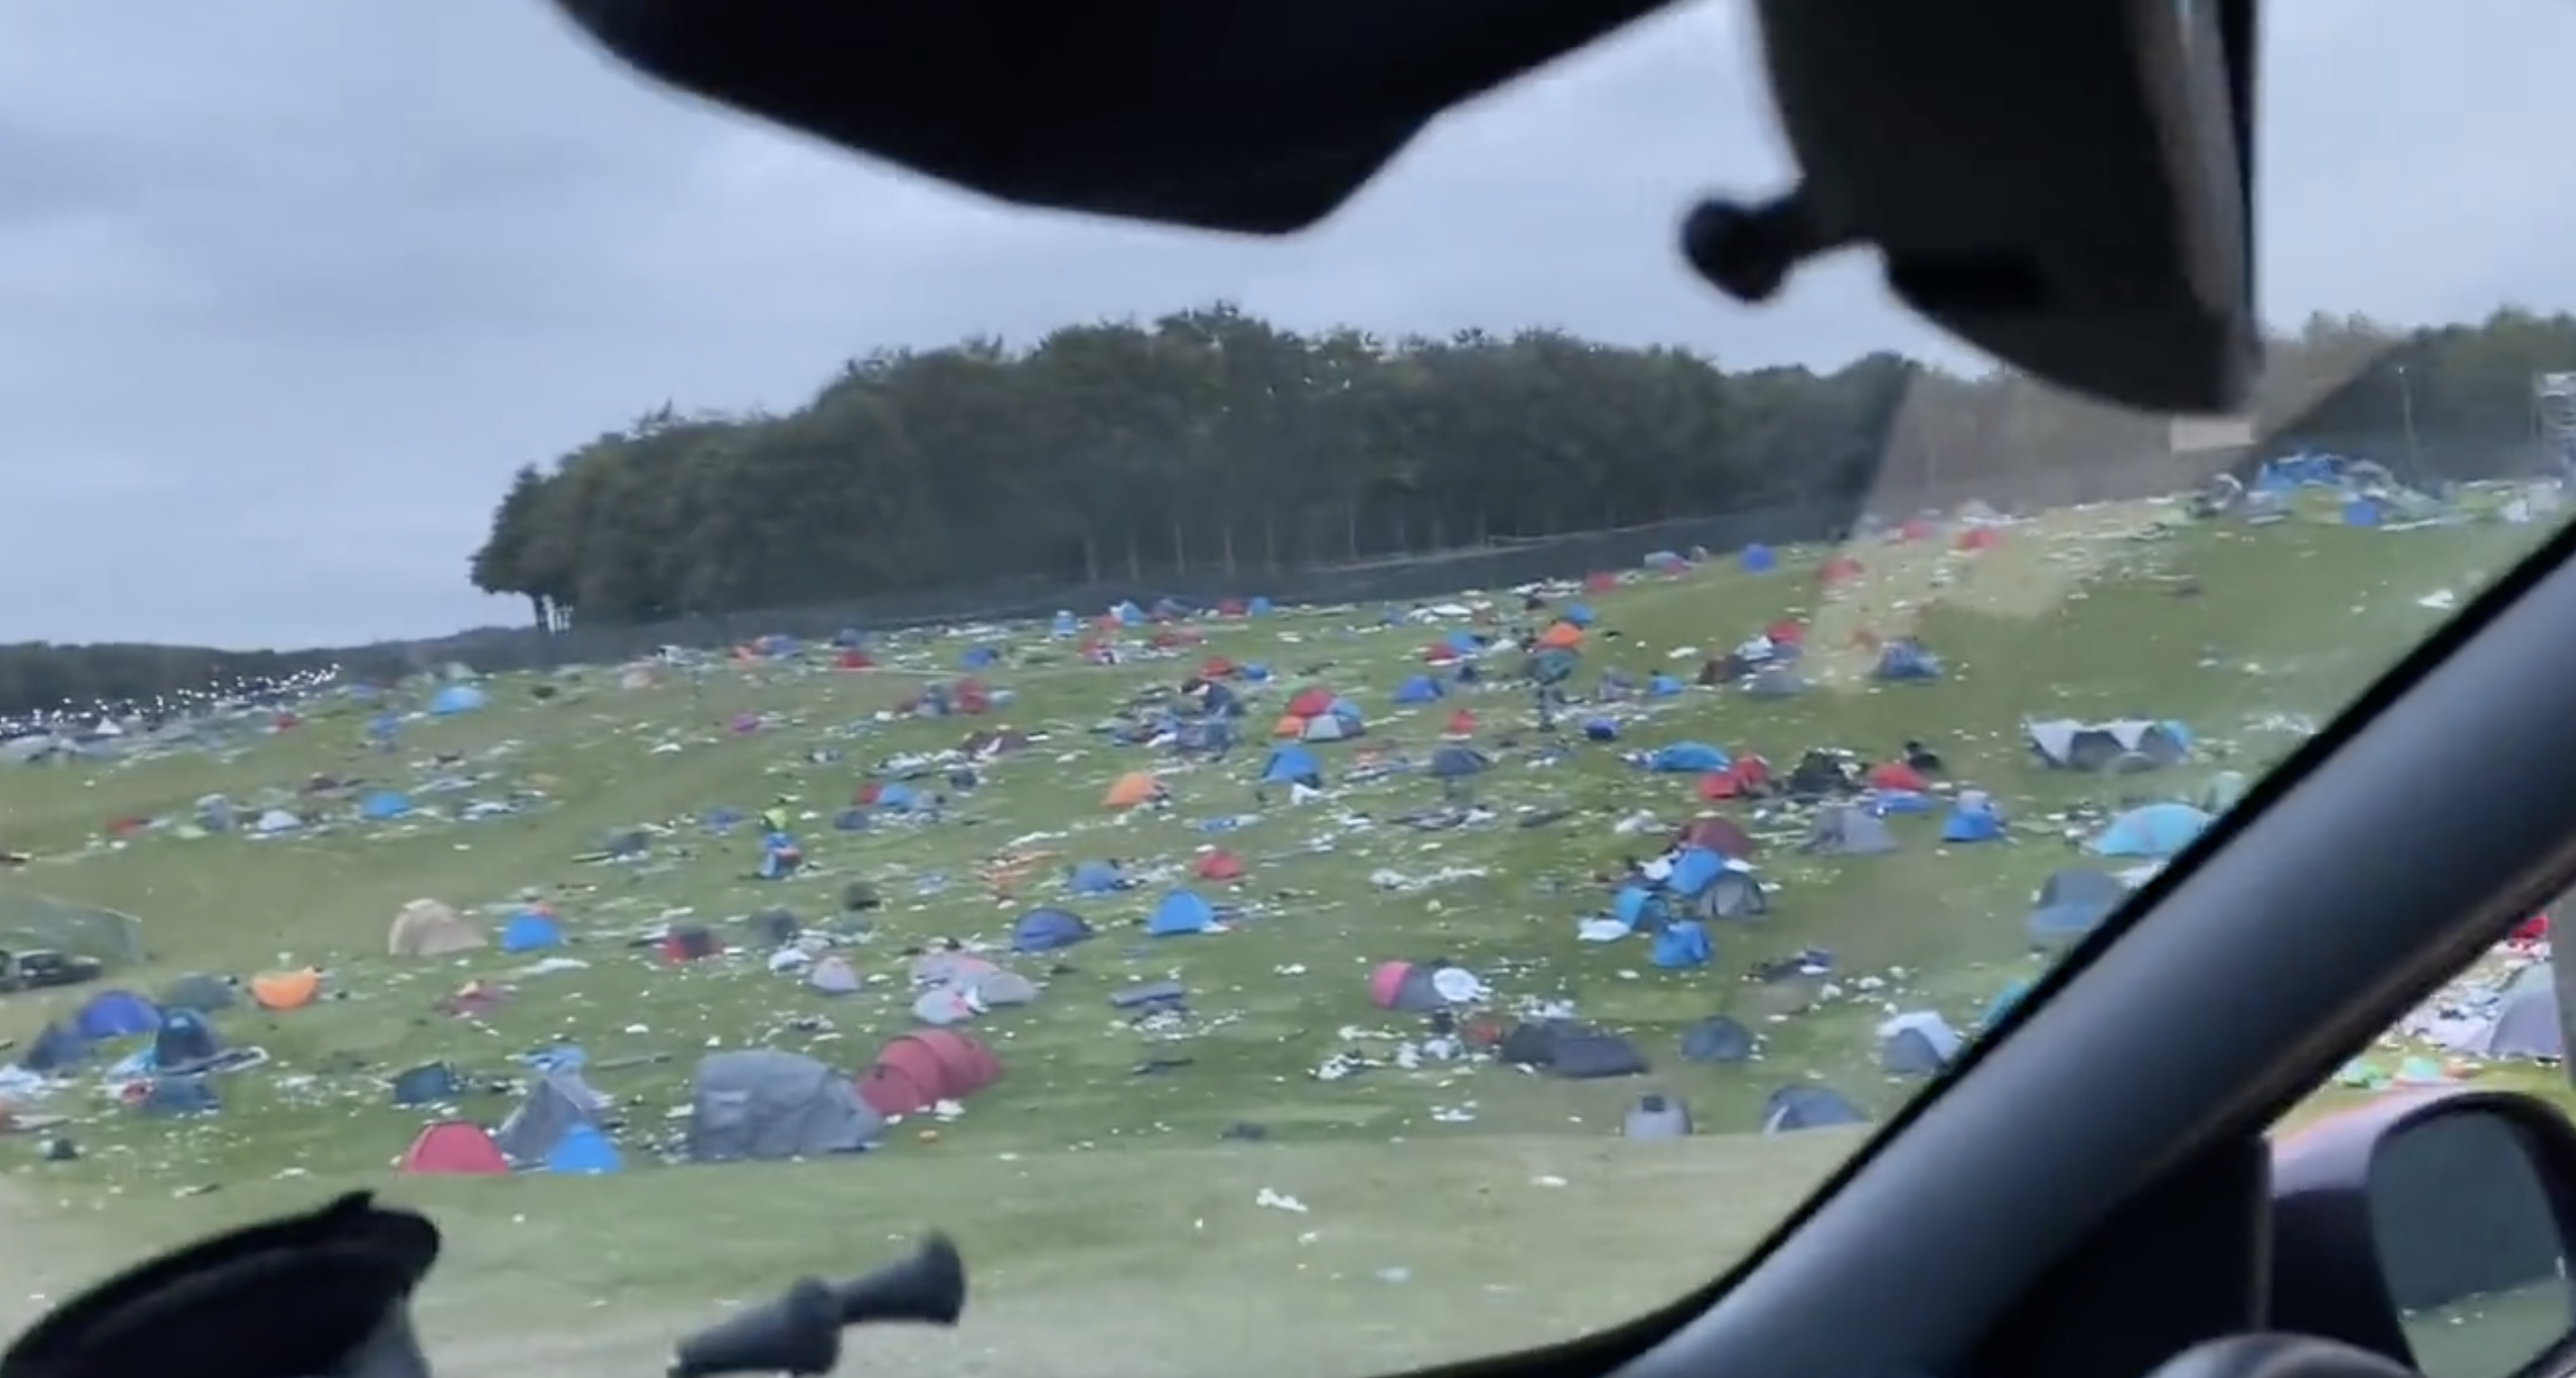 A video shared by a volunteer shows the volume of tents and litter left behind at Leeds Festival. Credit: Twitter/X, Jack Lowe